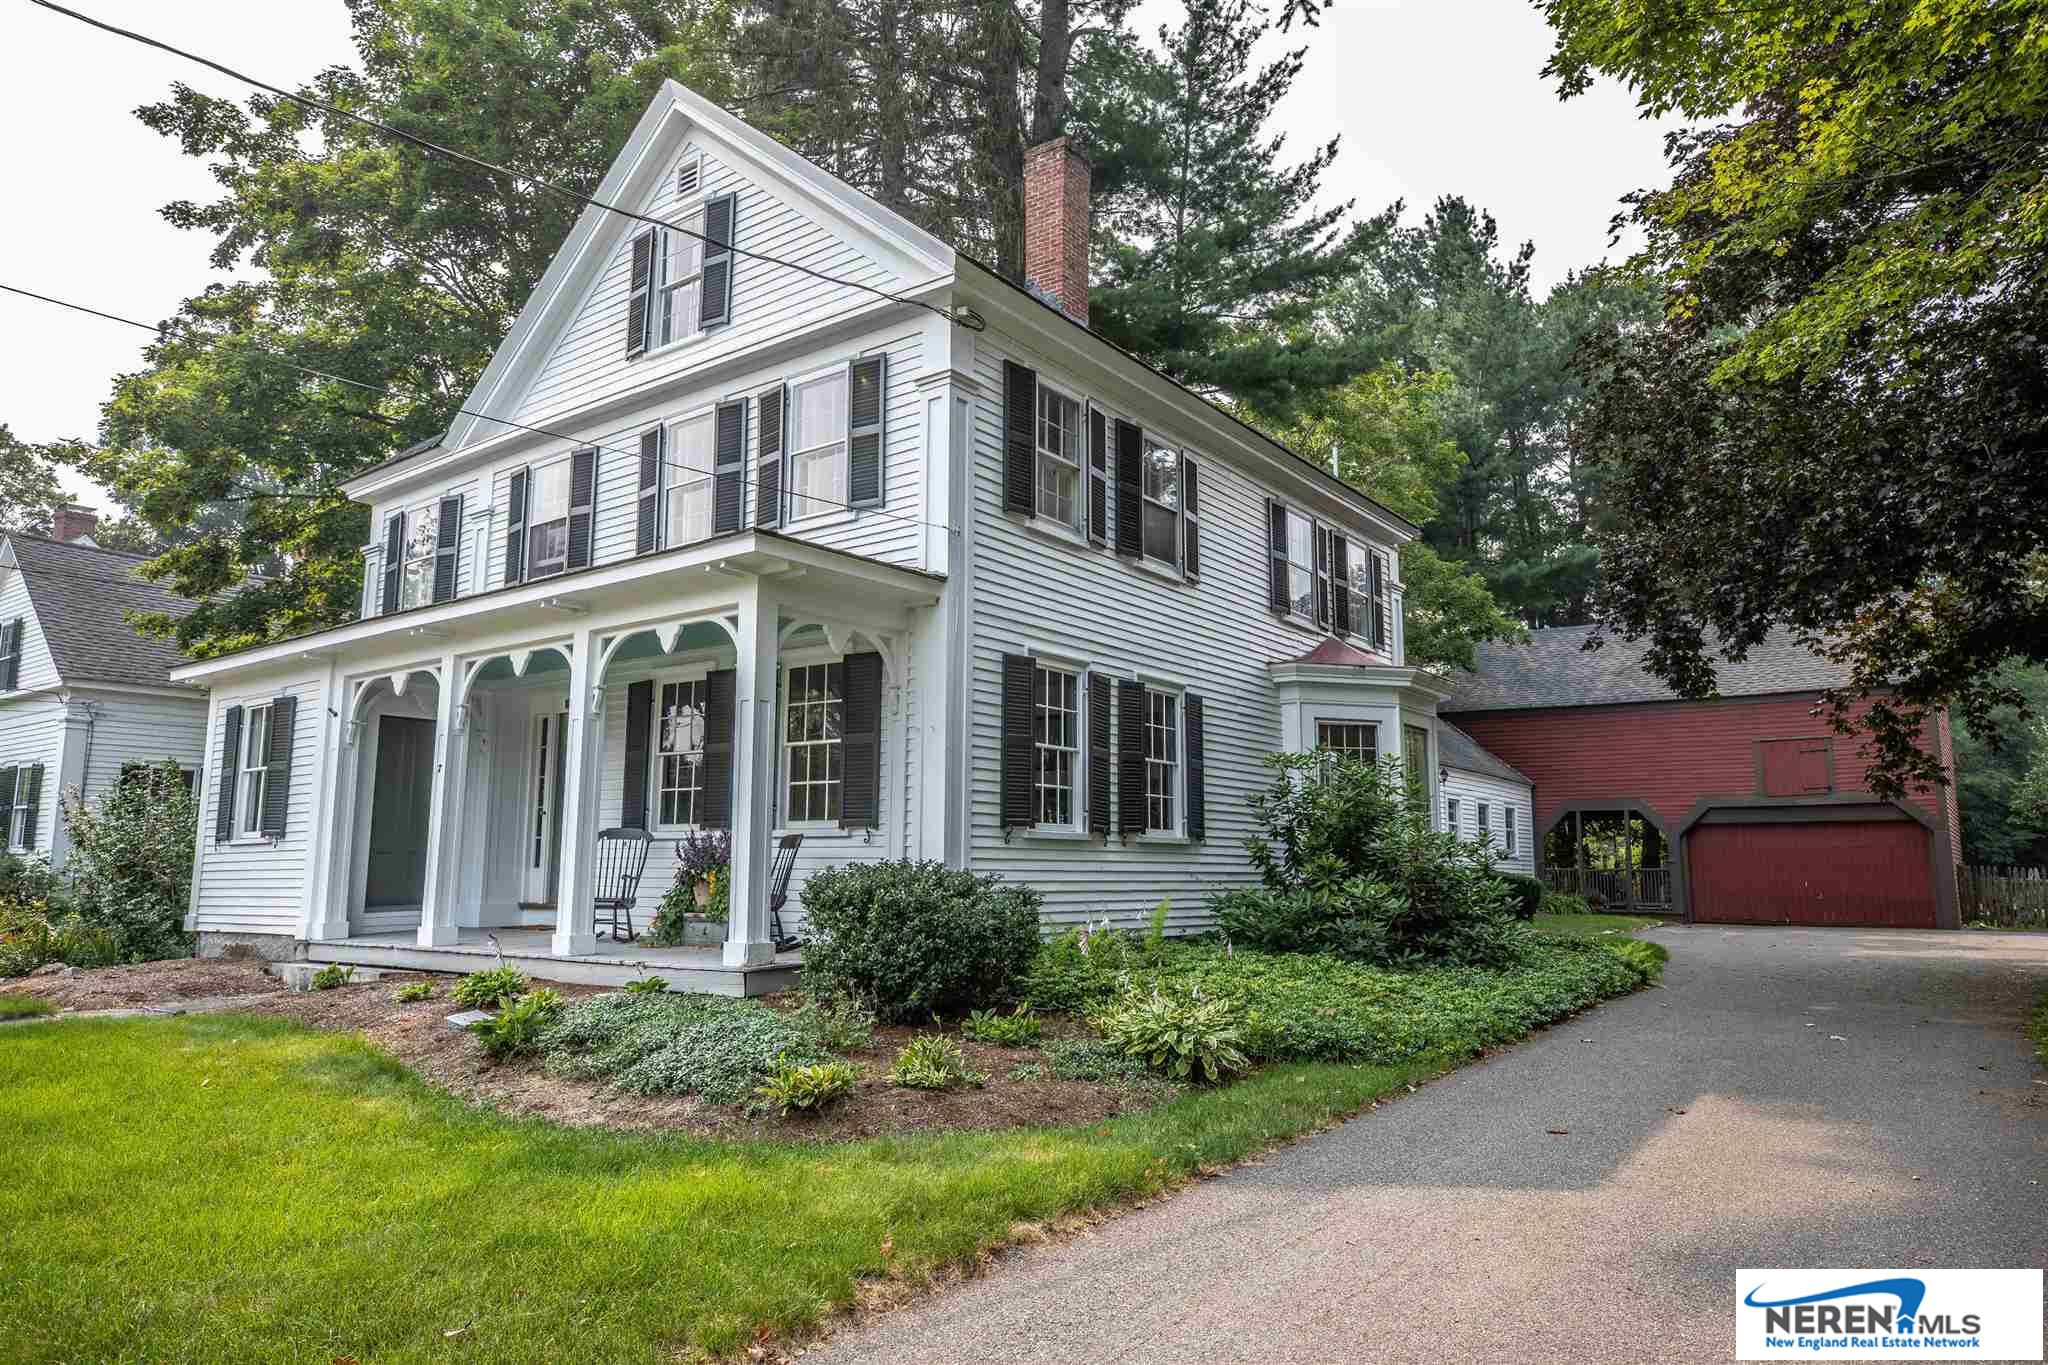 7 Carriage Road, Amherst, NH 03031